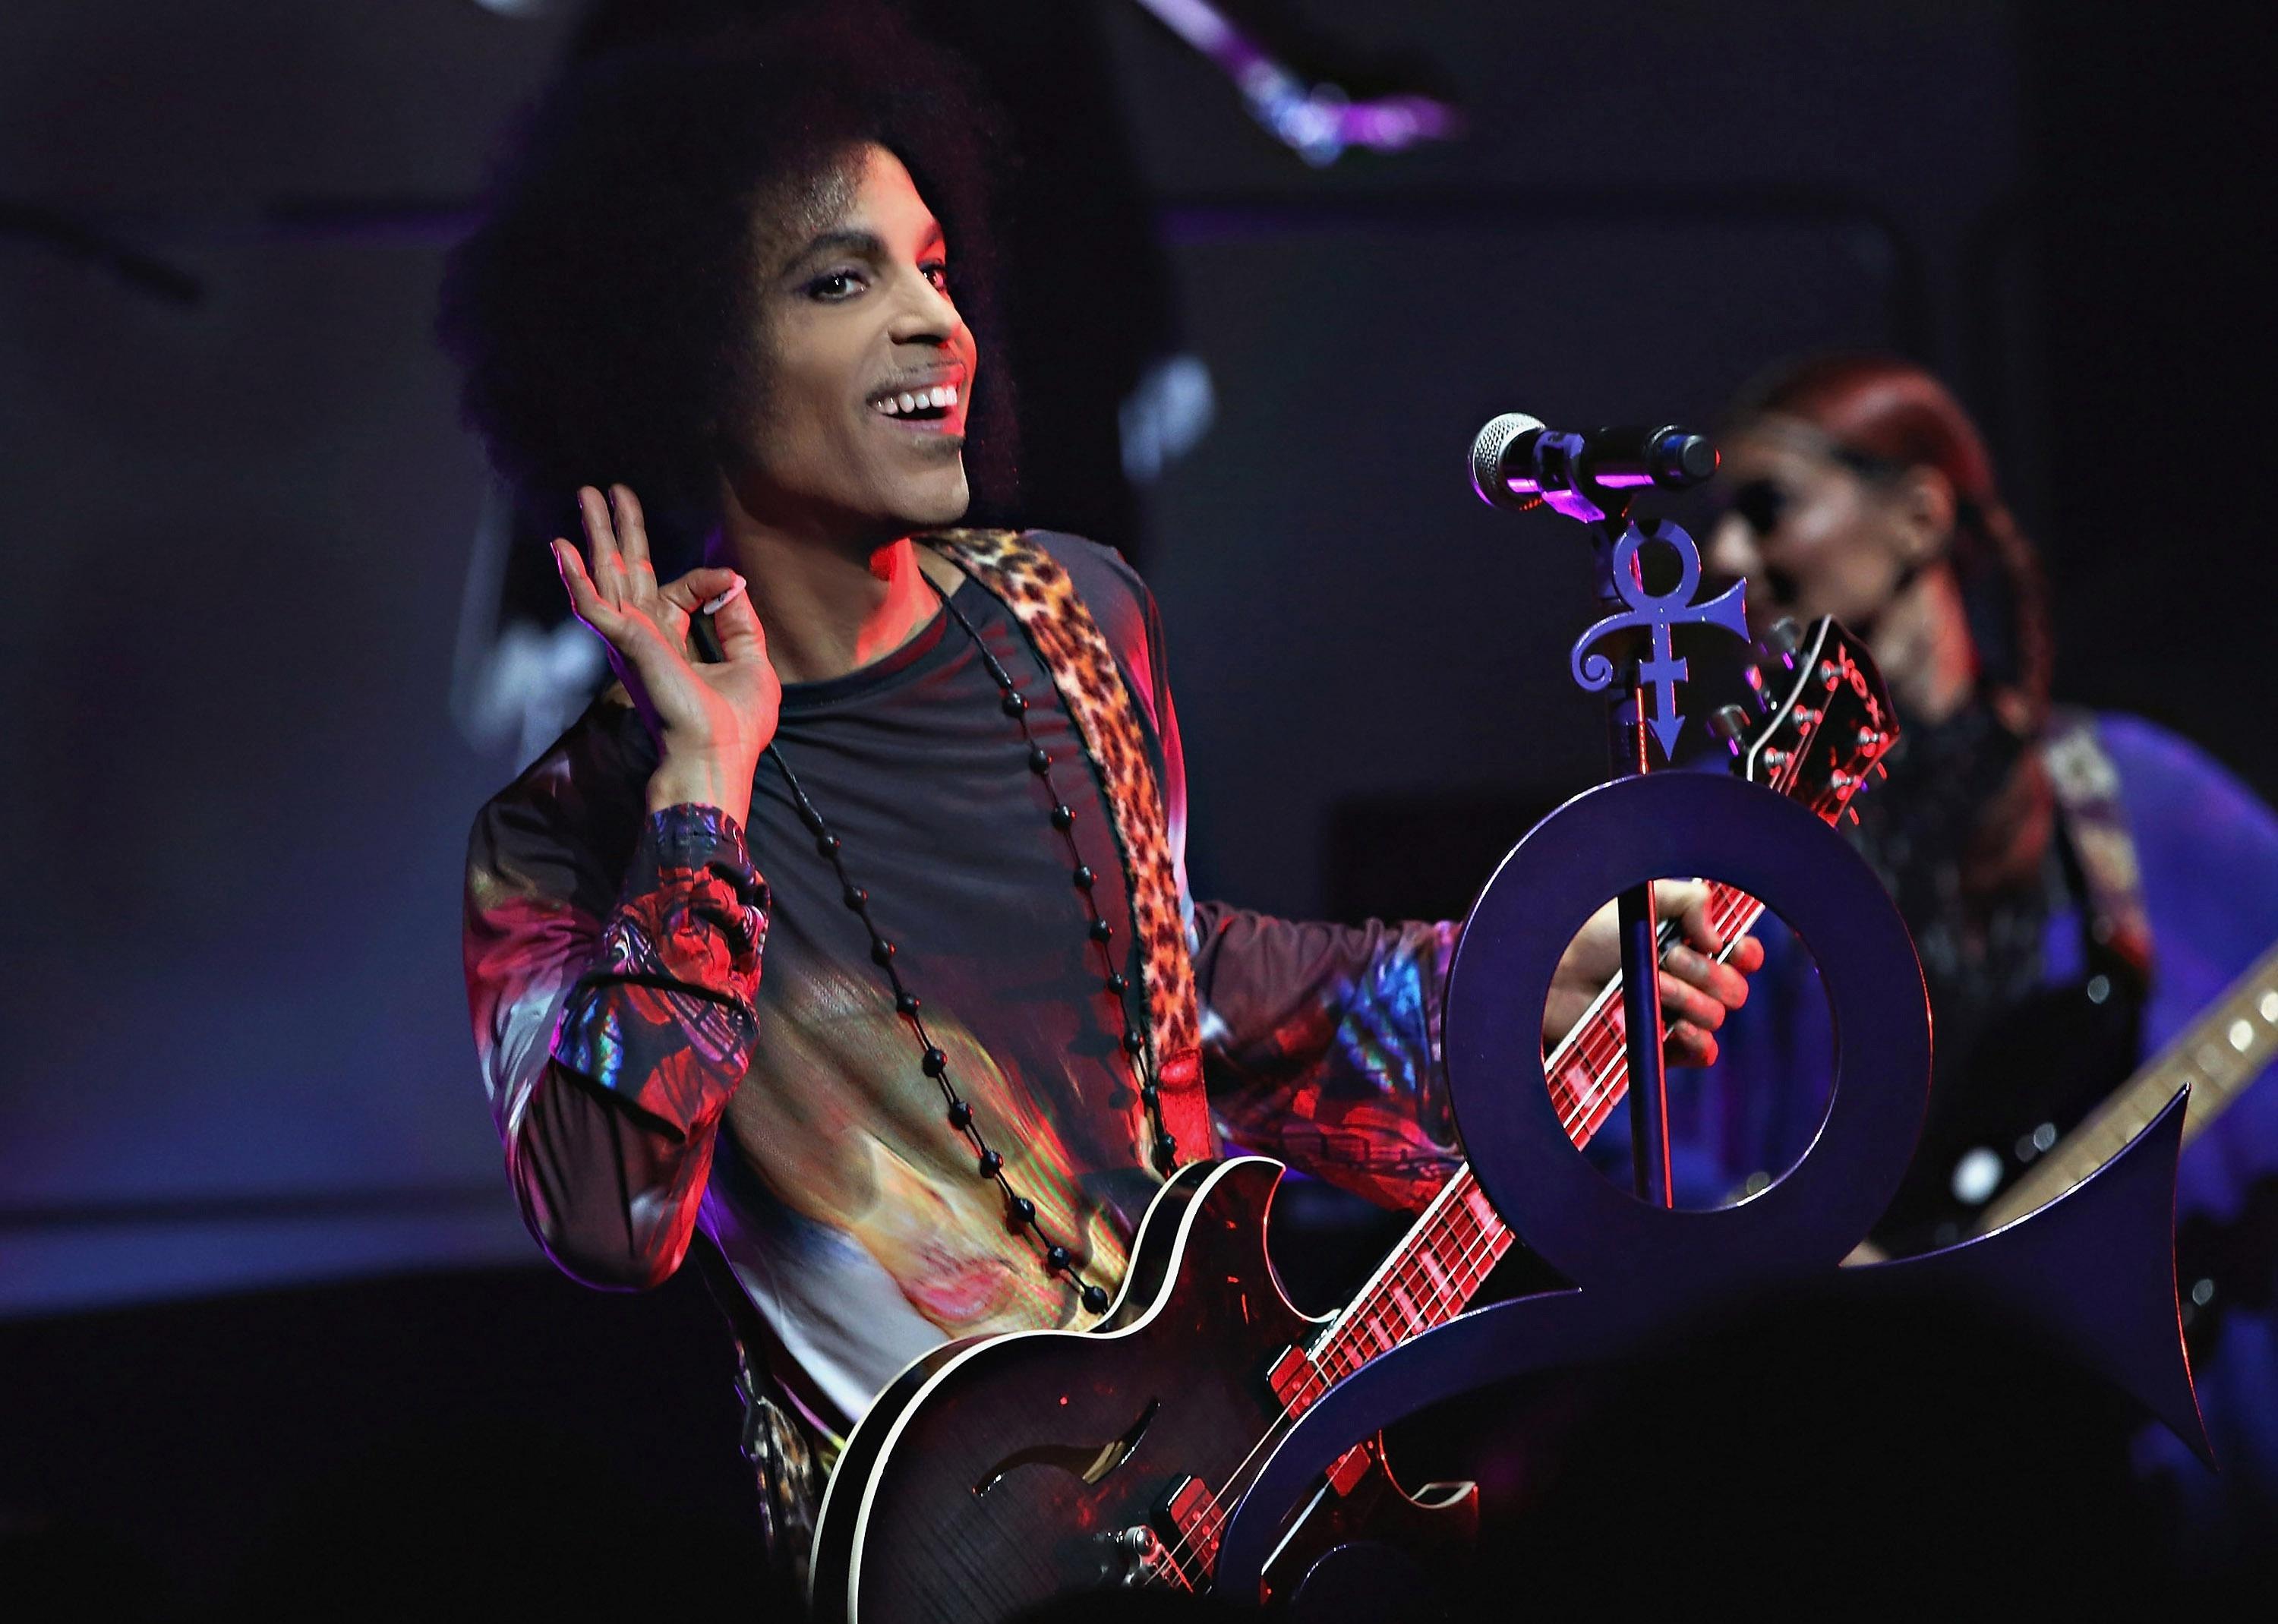 <p>Playing Detroit for the first time in over a decade, an energized Prince served up two and a half hours of funked-up hits at the Fox Theatre. The <a href="https://www.detroitnews.com/story/entertainment/2015/04/10/prince-delivers-towering-funked-up-fox-theatre-show/25564335/">Detroit Press wrote that the artist treated</a> the venue "like his own personal house party" and cultivated a "loose, improvisational feel." Prince embarked on his Piano & A Microphone Tour the next year and then tragically died that April.</p>